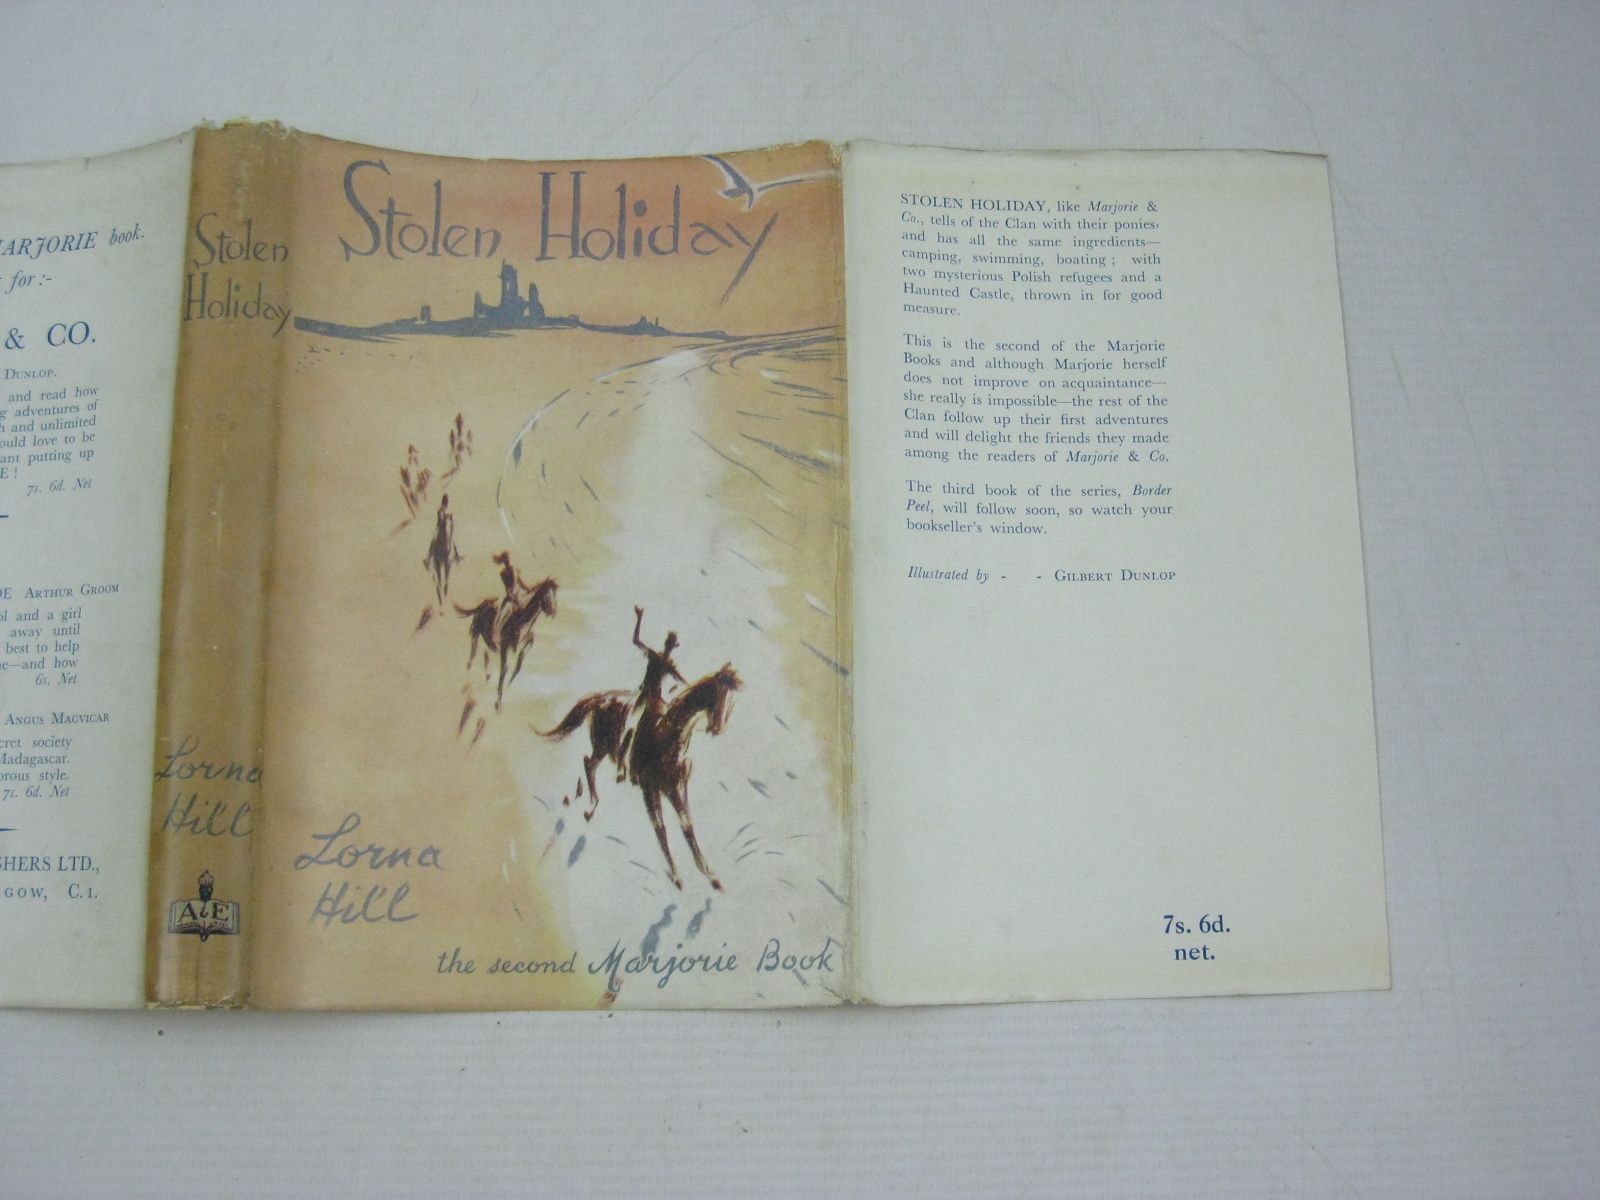 Photo of STOLEN HOLIDAY written by Hill, Lorna illustrated by Dunlop, Gilbert published by A. & E. Publishers Ltd. (STOCK CODE: 1404283)  for sale by Stella & Rose's Books